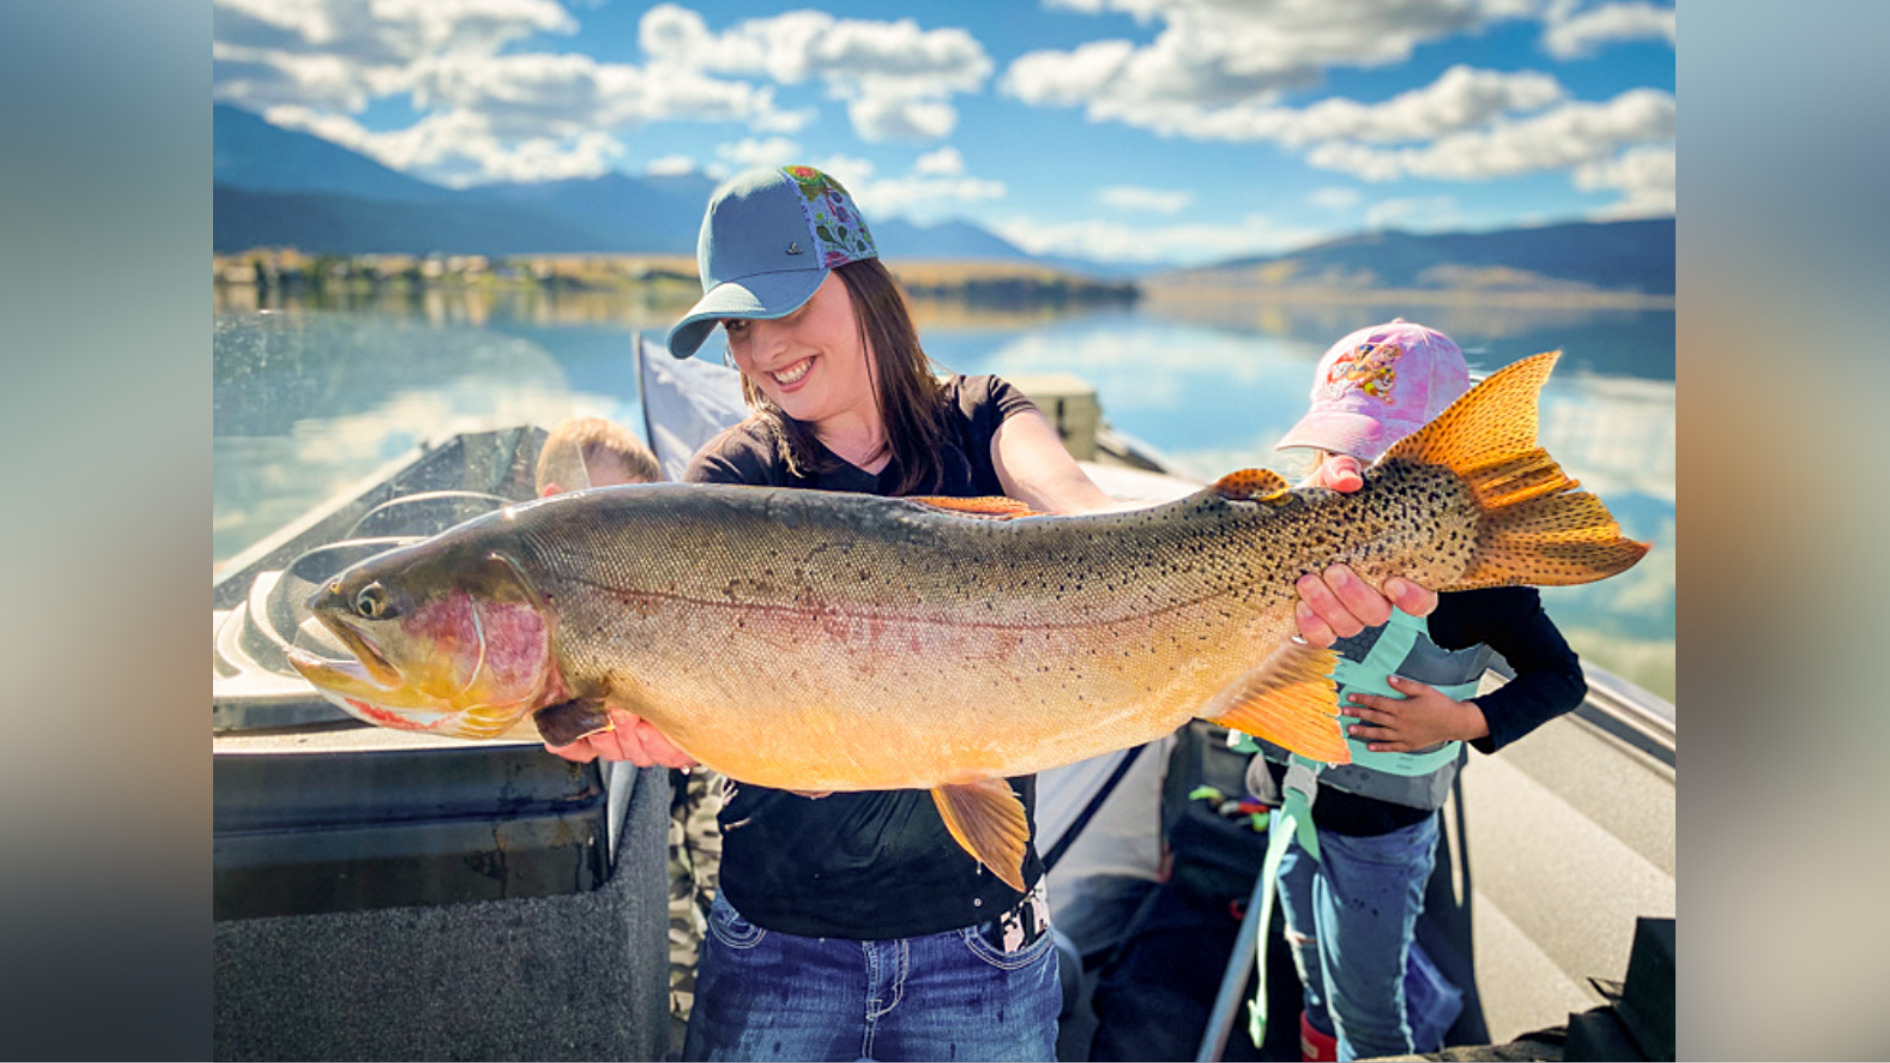 Angler sets state record with 'monster' hybrid trout